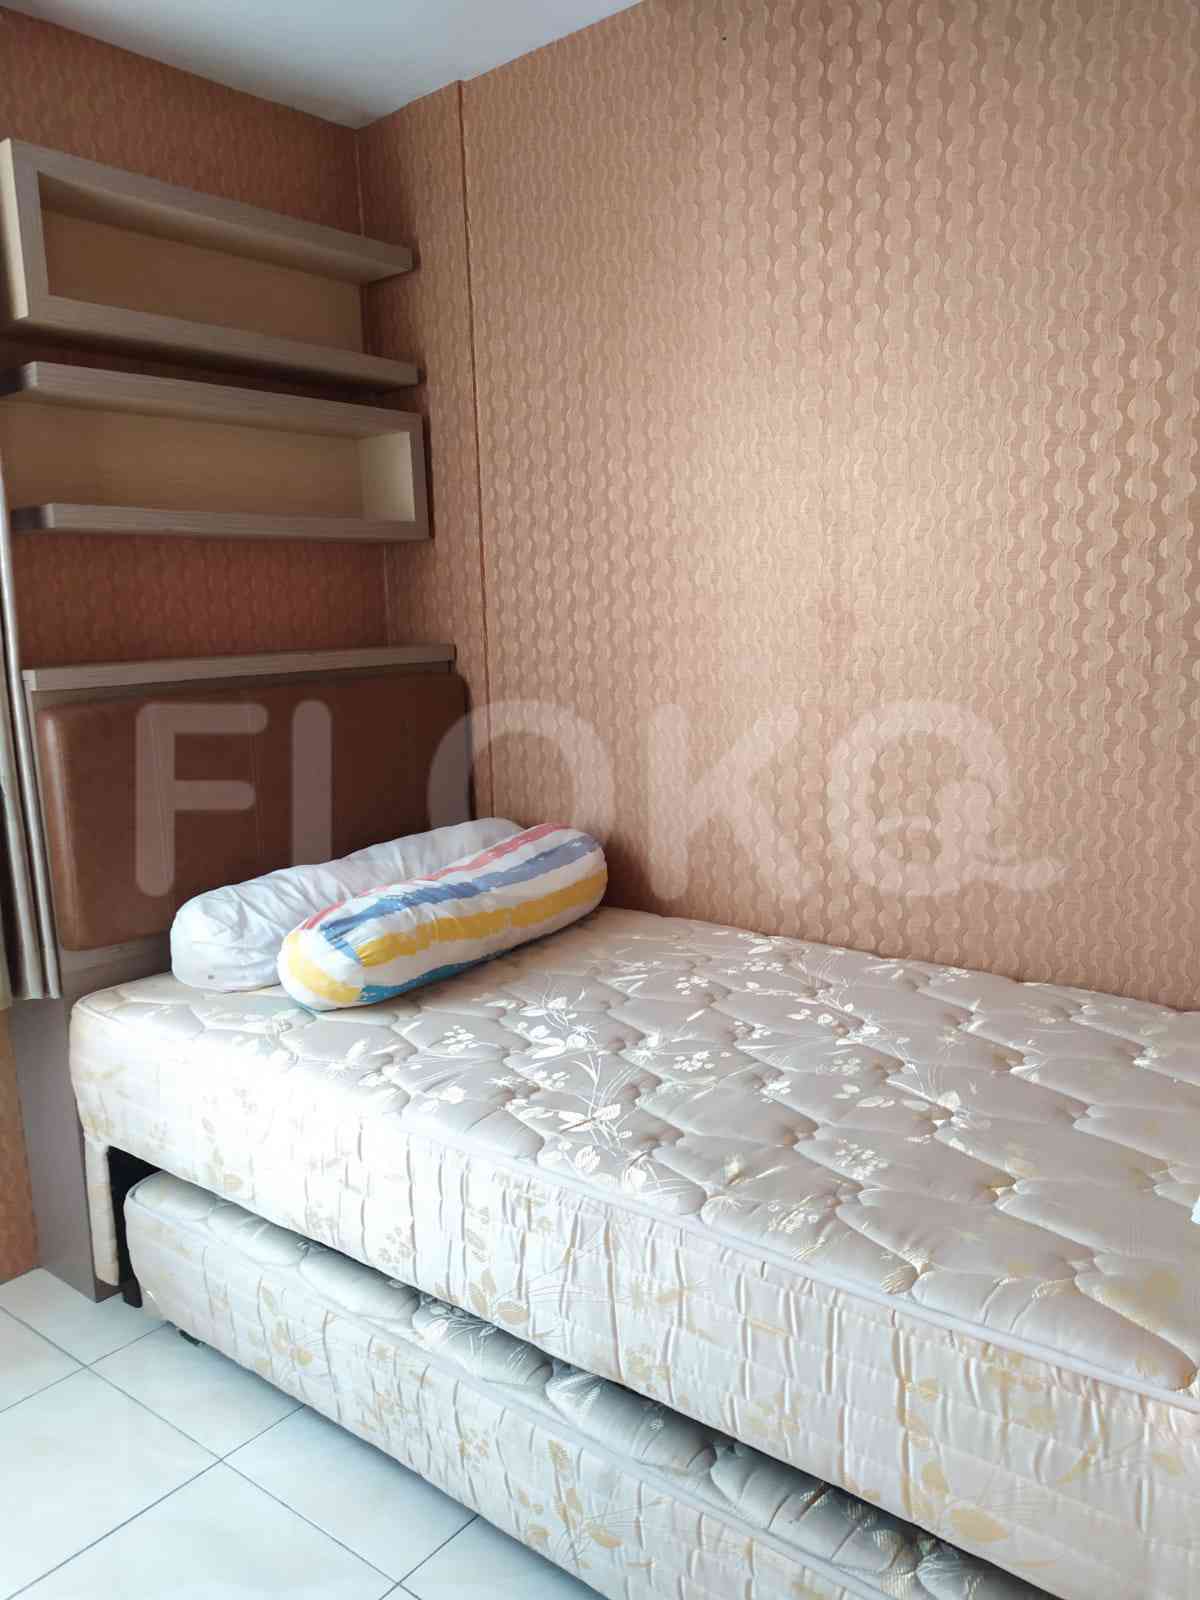 2 Bedroom on 16th Floor for Rent in Seasons City Apartment - fgrd17 3